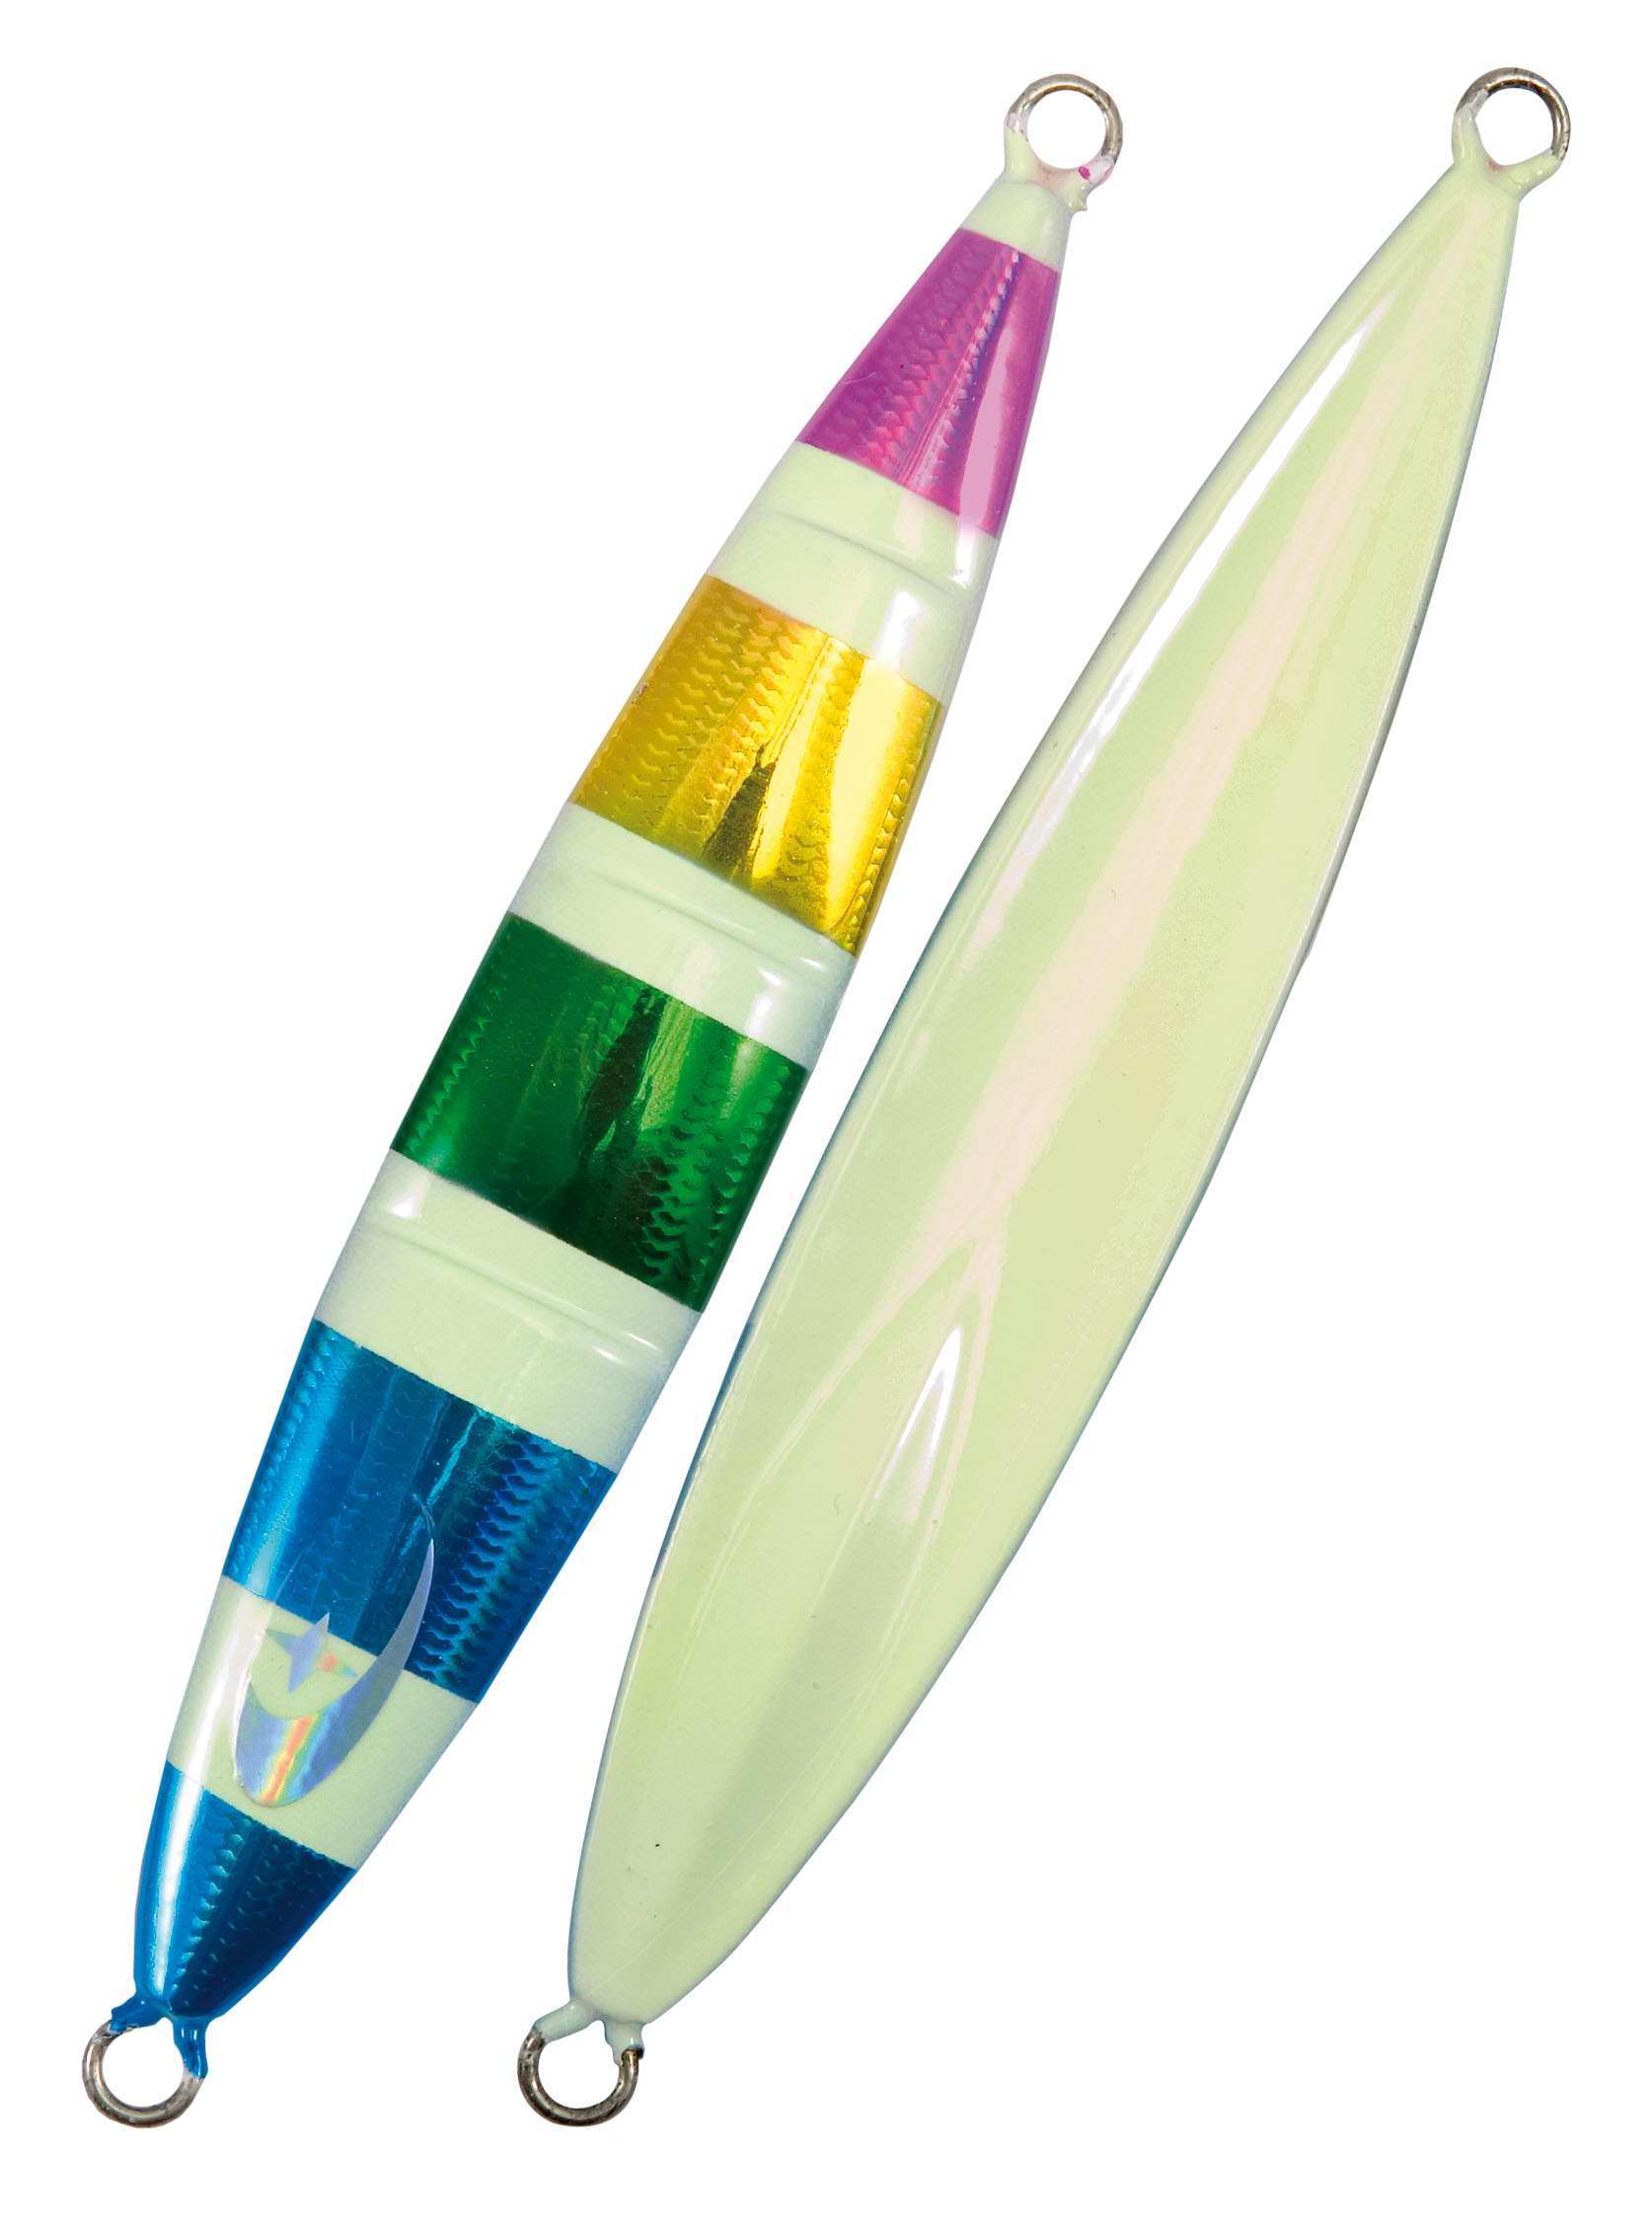 OUT/OUT_ARTICOLI/areapesca.it_AP01109.3444.3441_yume-metal-jig-11-cm---80-gr-raimbow-with-fluo-stripes.jpg